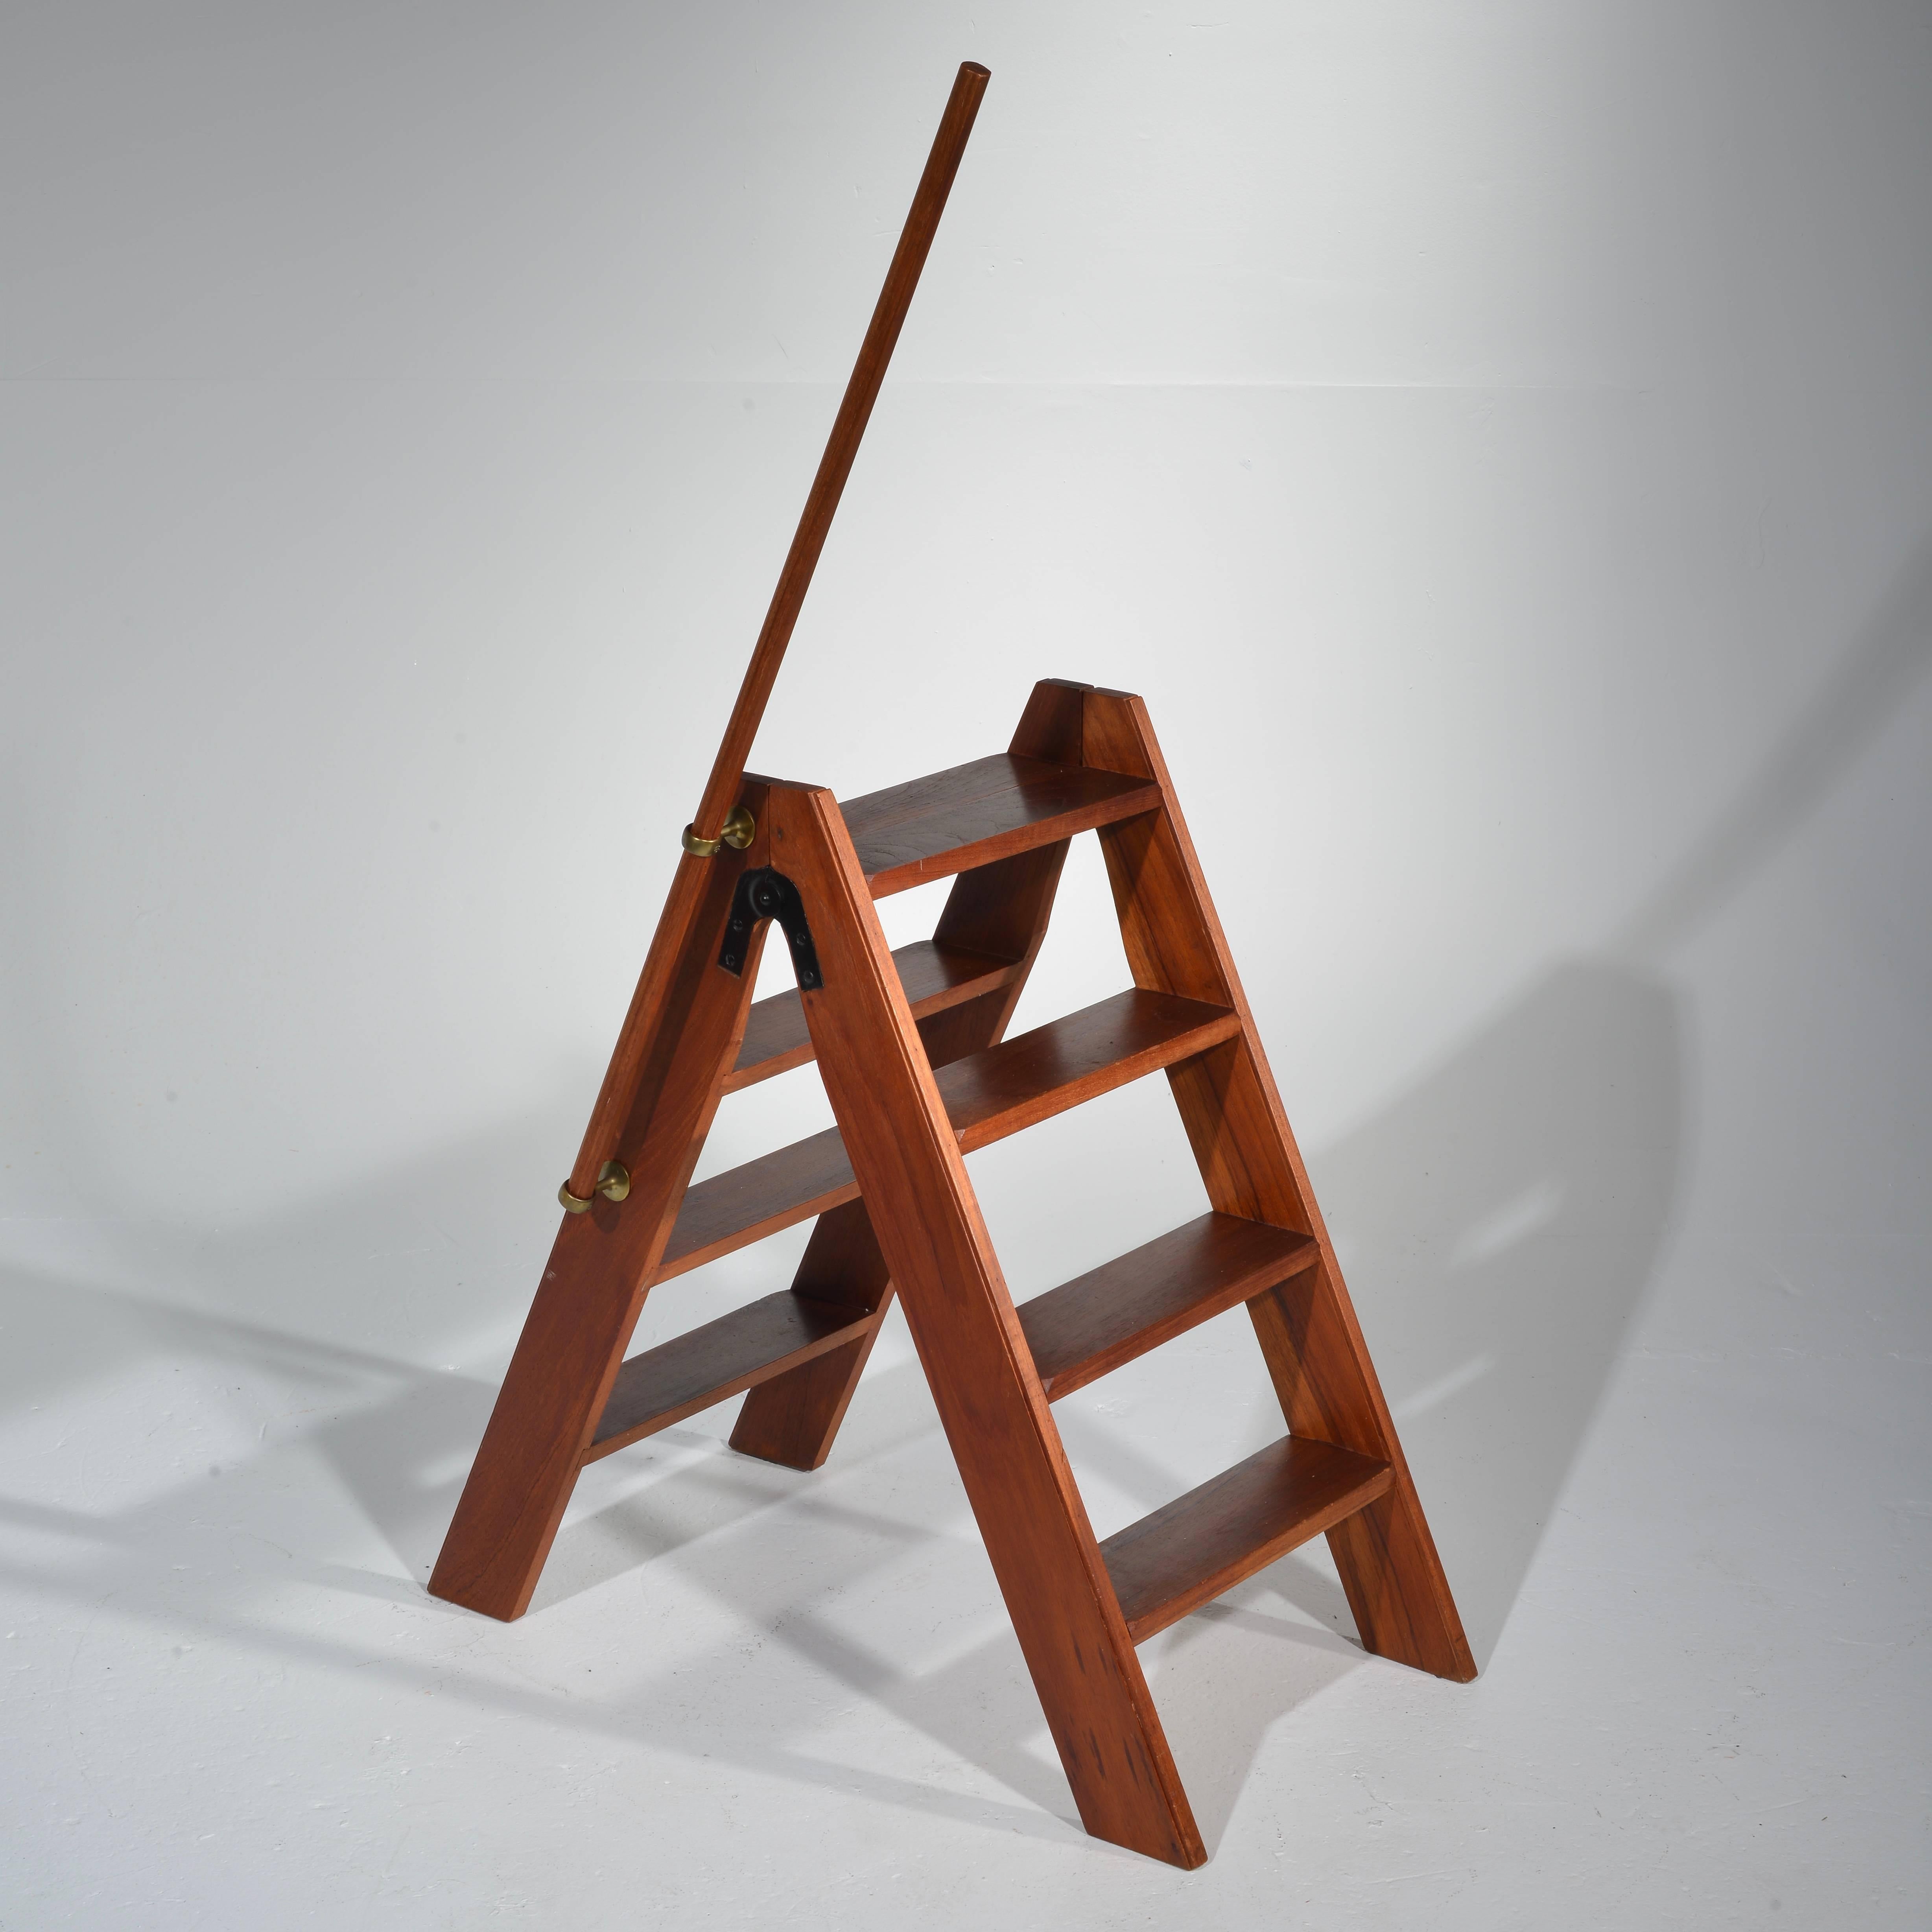 This is a vintage 1940s handcrafted folding step ladder in excellent condition.